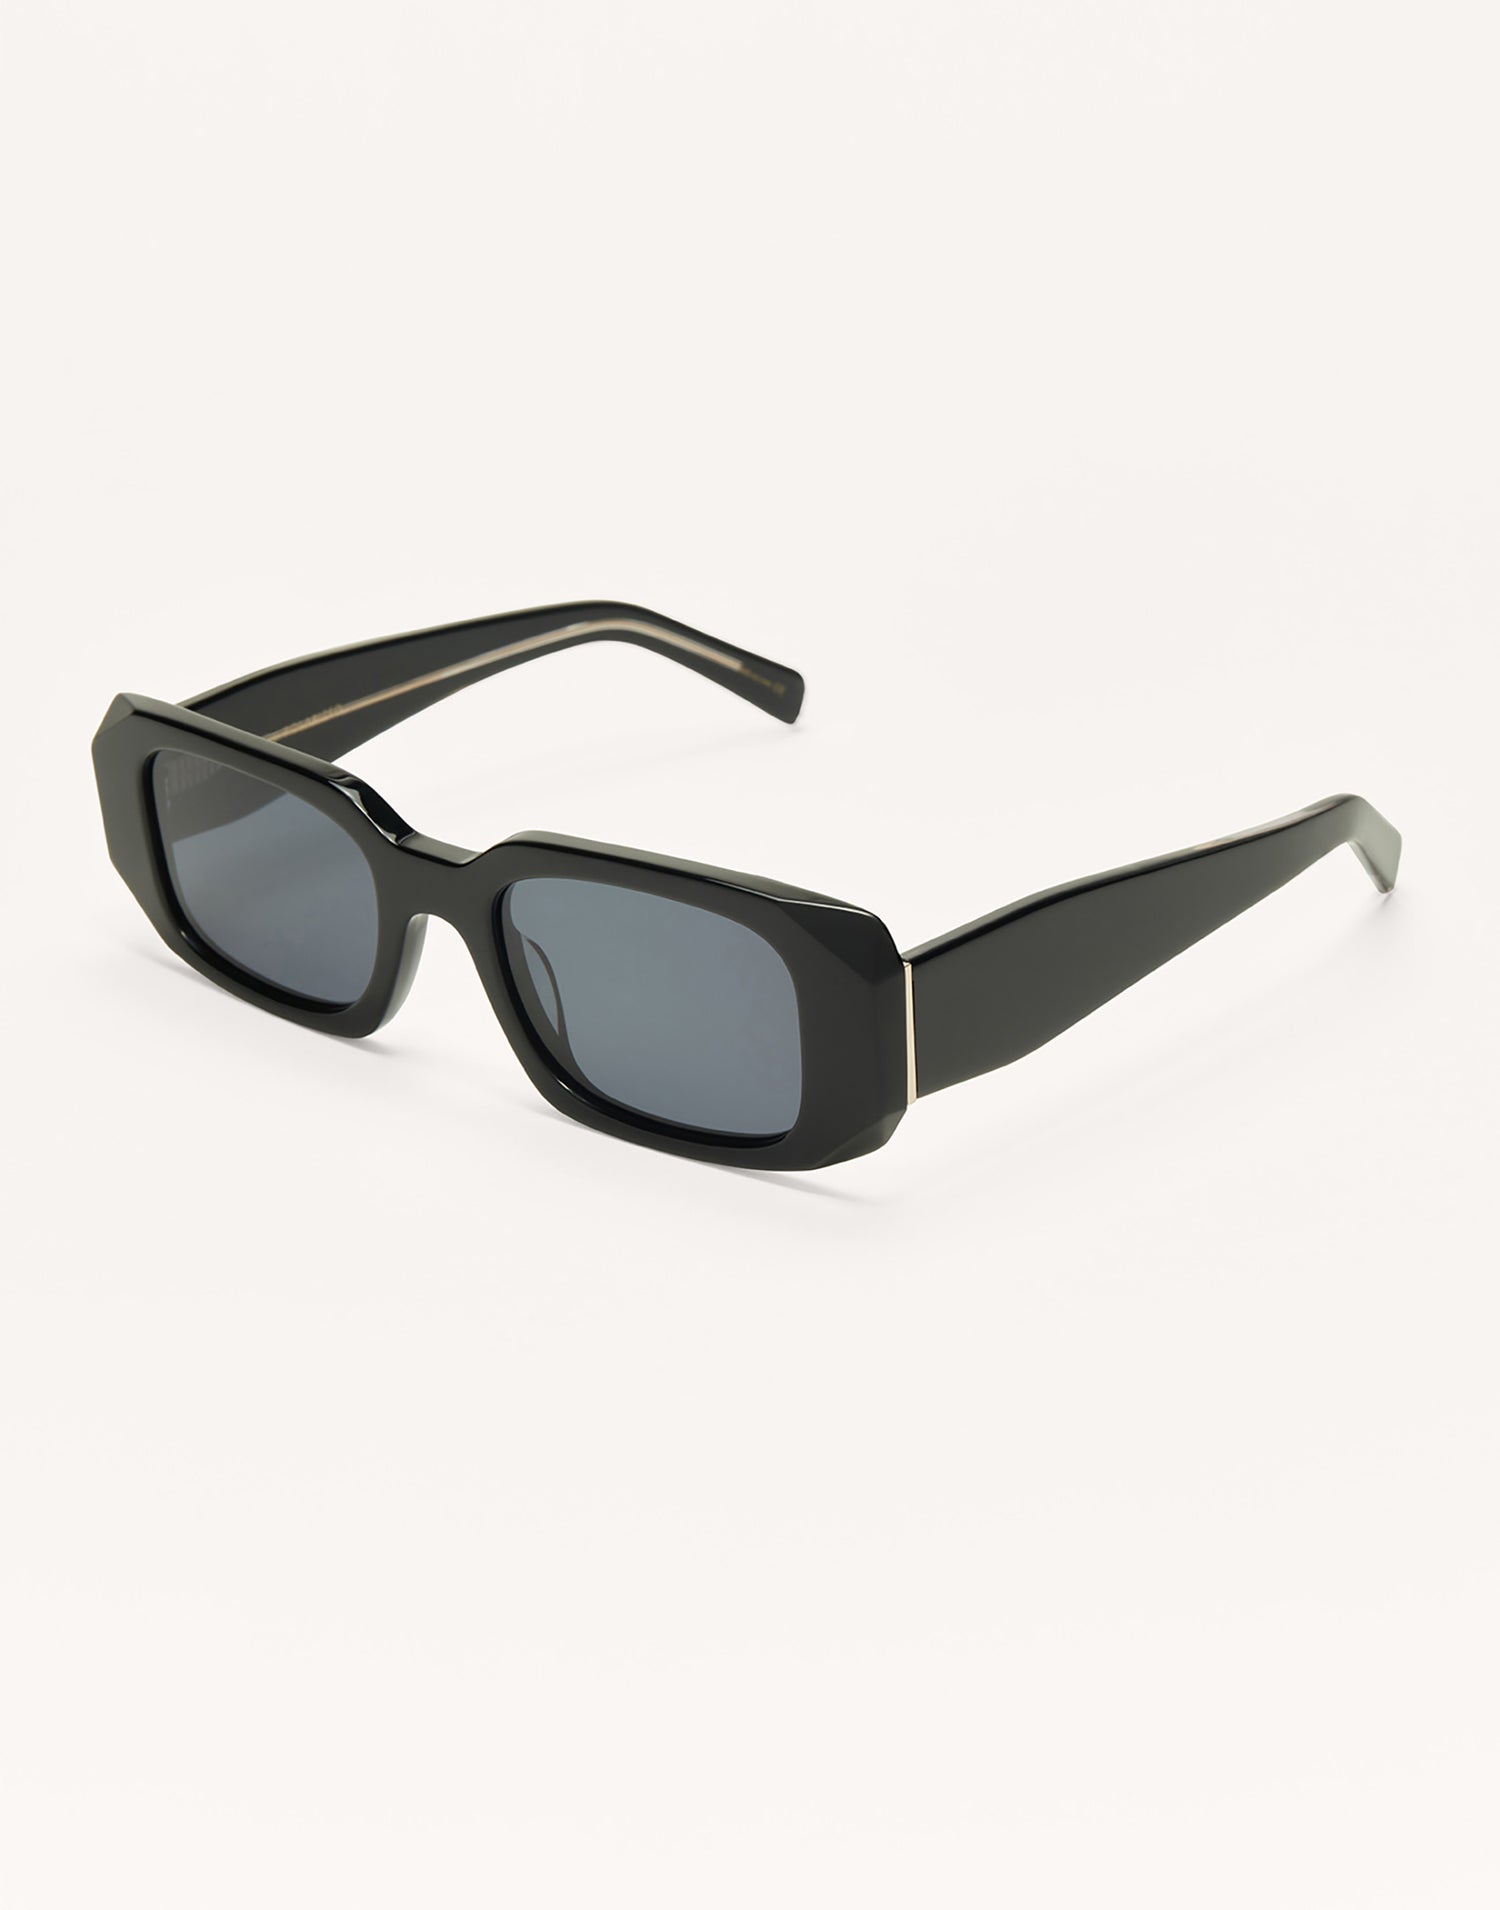 Off Duty Sunglasses by Z Supply in Polished Black - Angled View